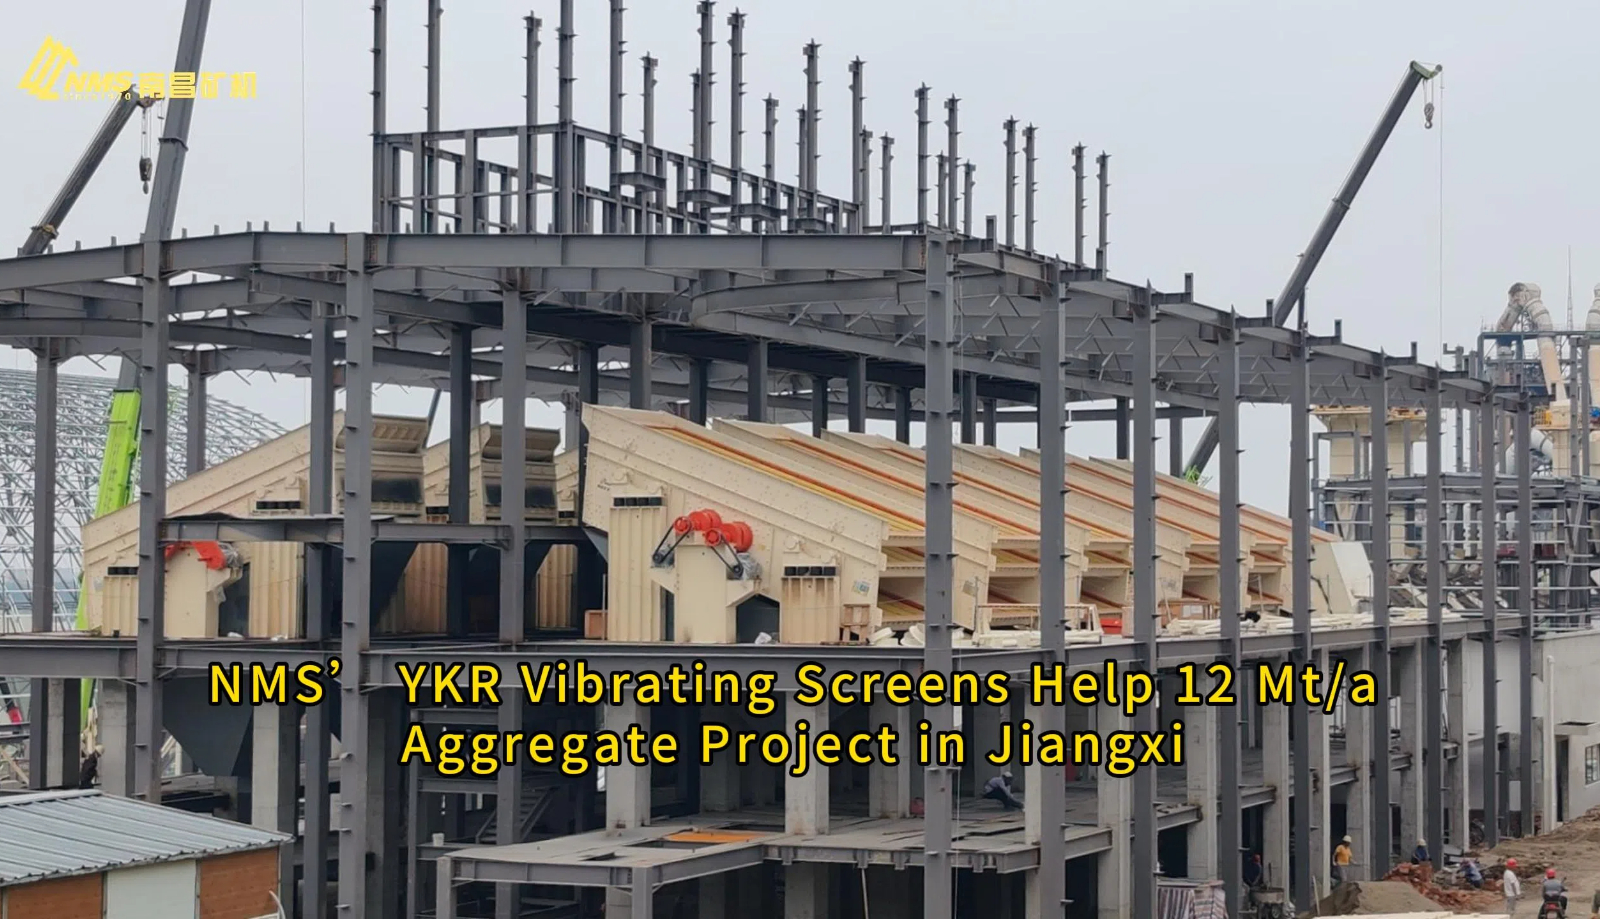 NMS’ YKR Vibrating Screens Help 12 Mt/a Aggregate Project in Jiangxi